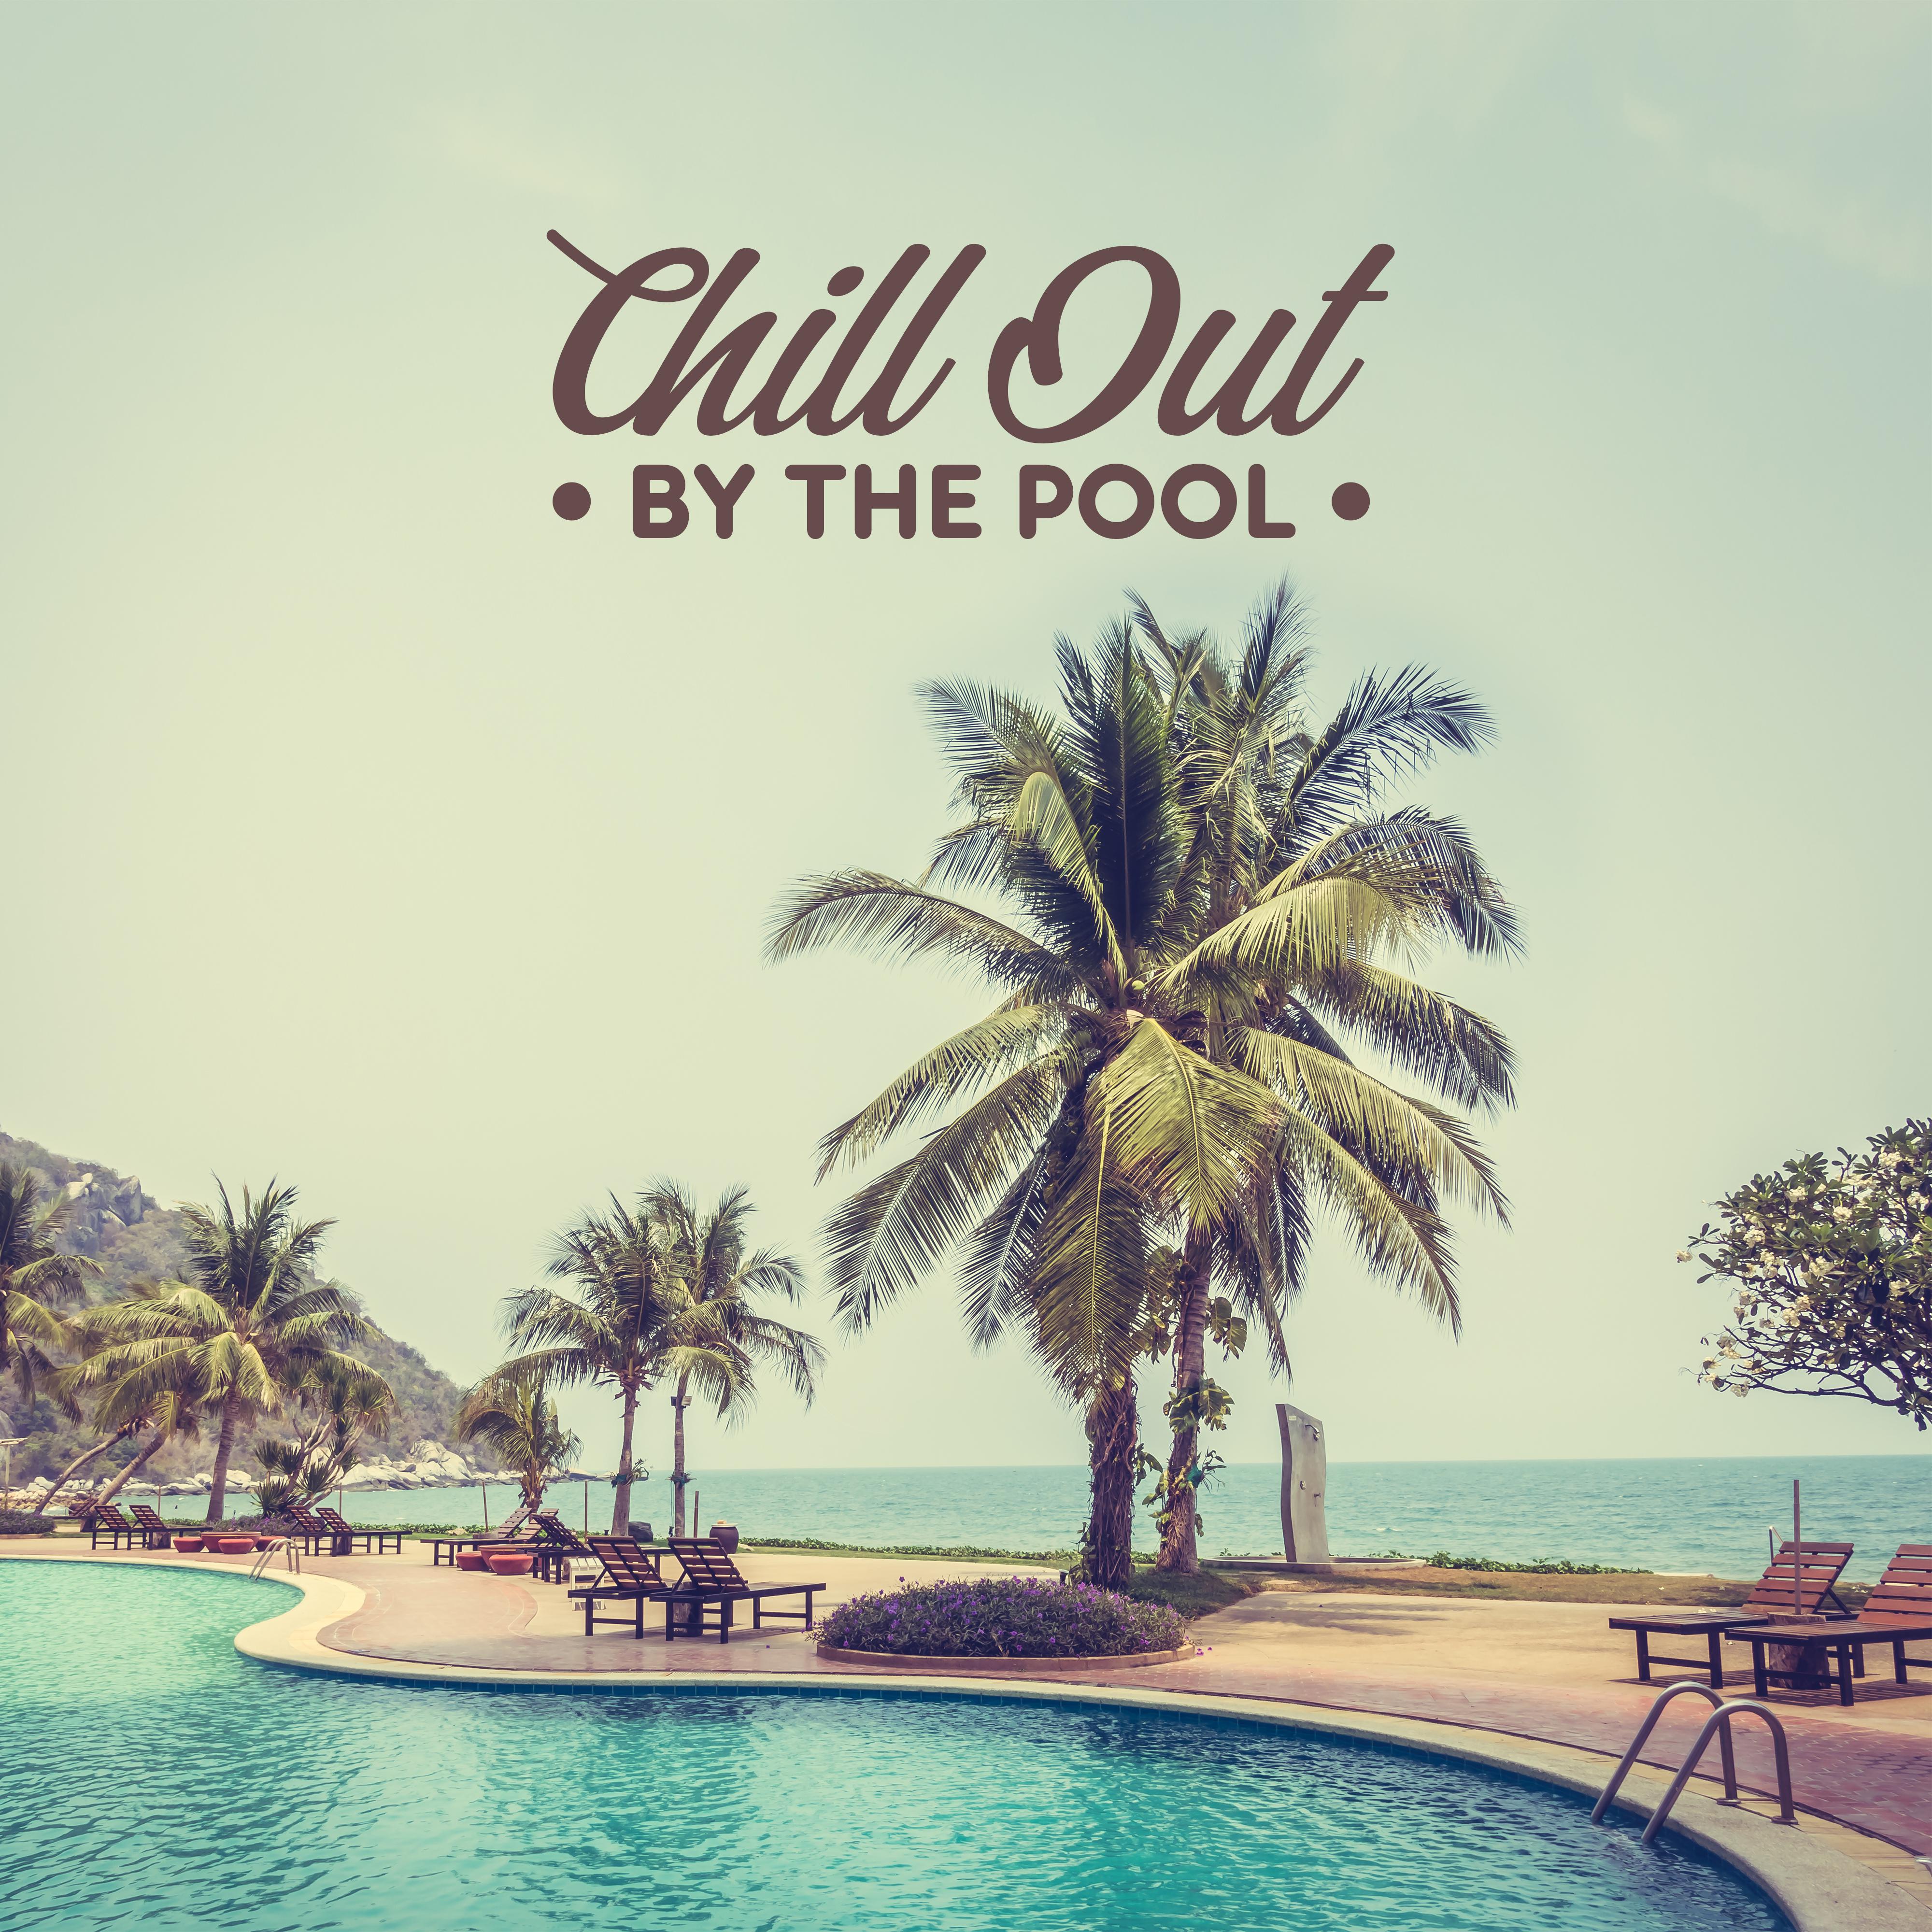 Chill Out by the Pool - Relaxing Melodies for the Summer to Rest and Relax by the Pool, Swimming, Bathing, Splashing and Playing around the Pool